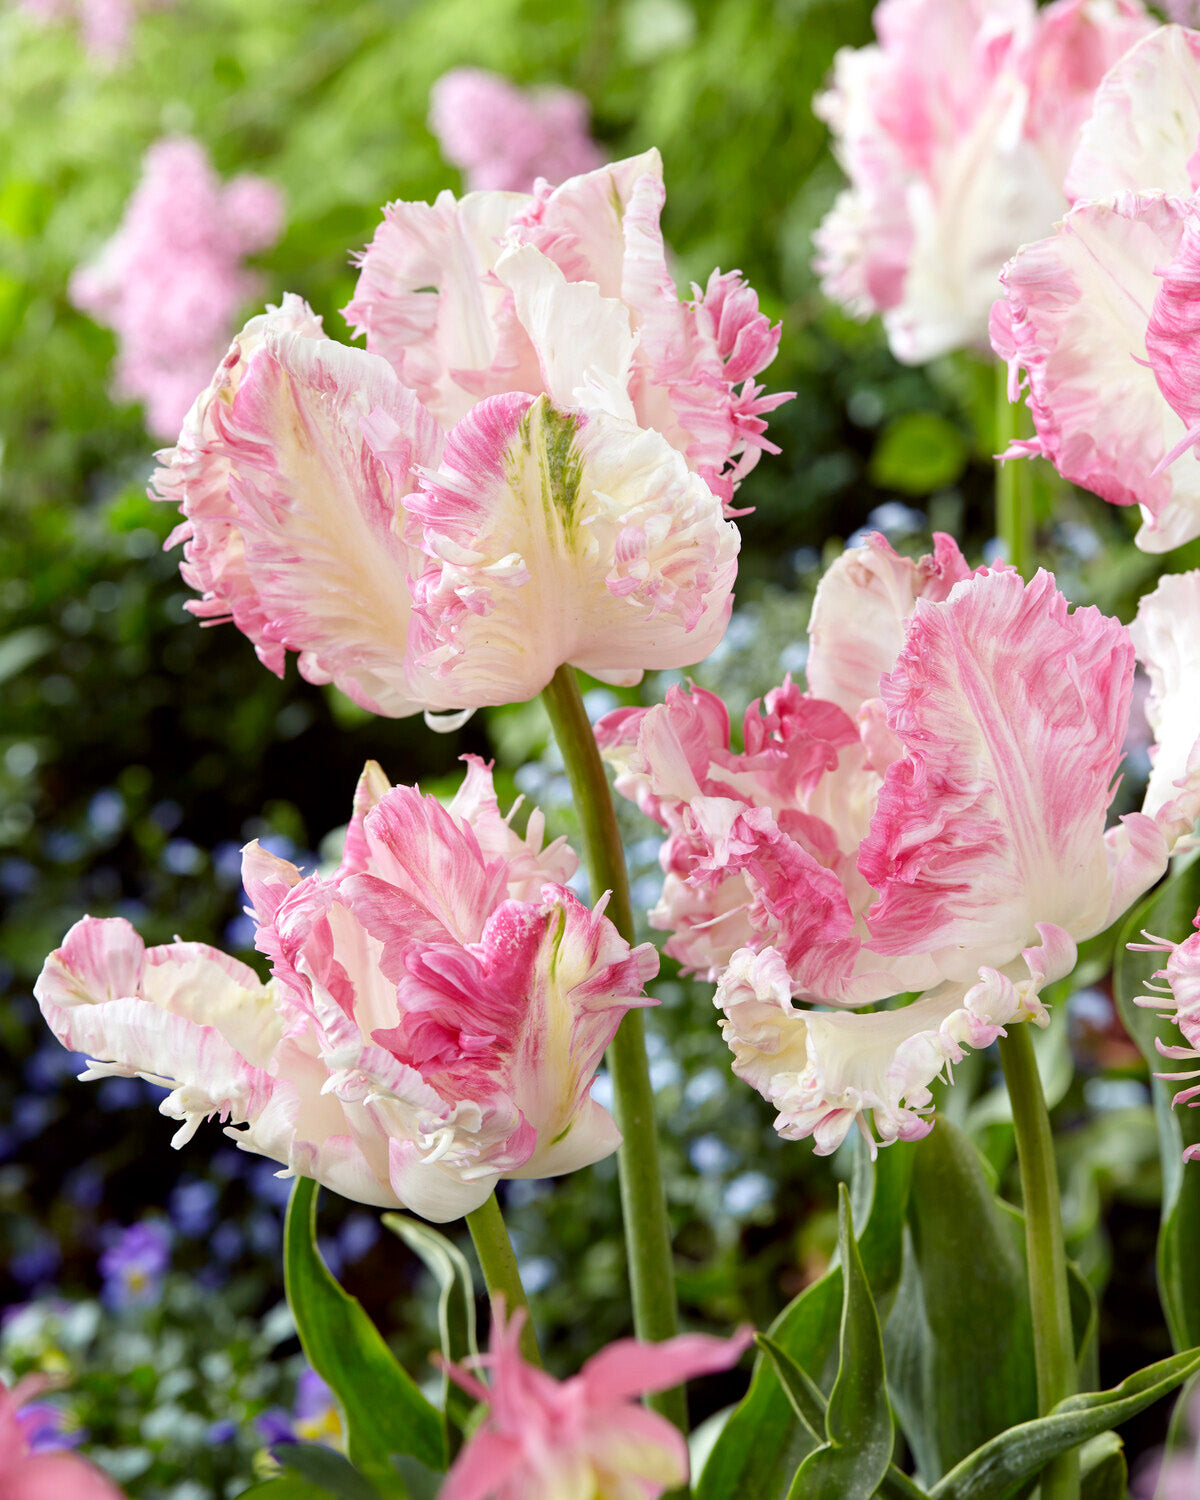 Tulip 'Cabanna' bulbs — Buy white/pink parrot tulips online at Farmer ...